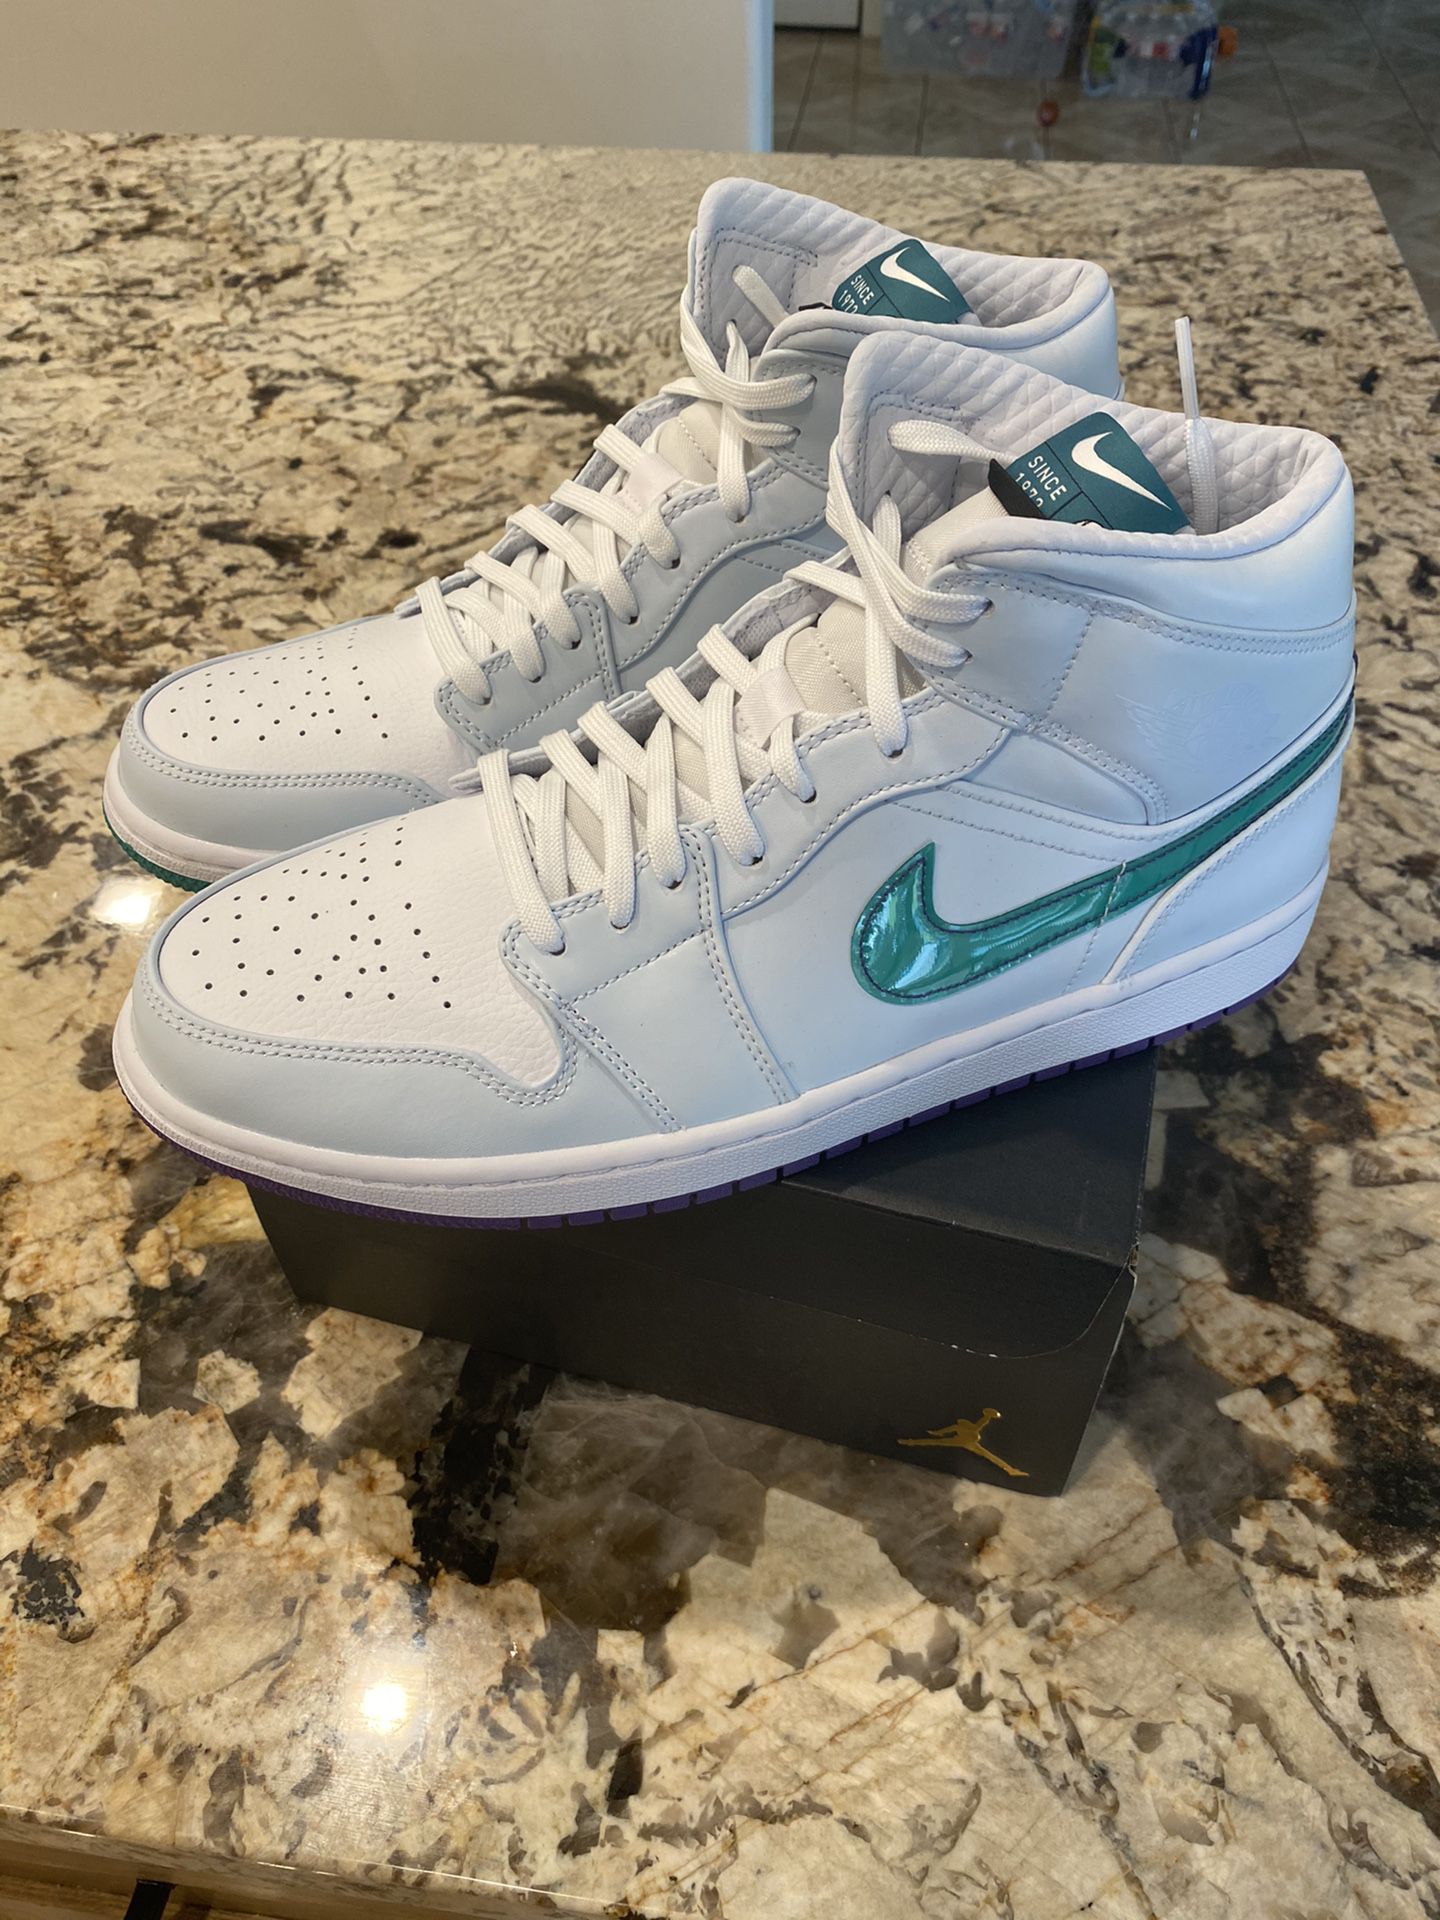 Jordan 1 Mid (Luka Doncic) Size 11 new 175 firm